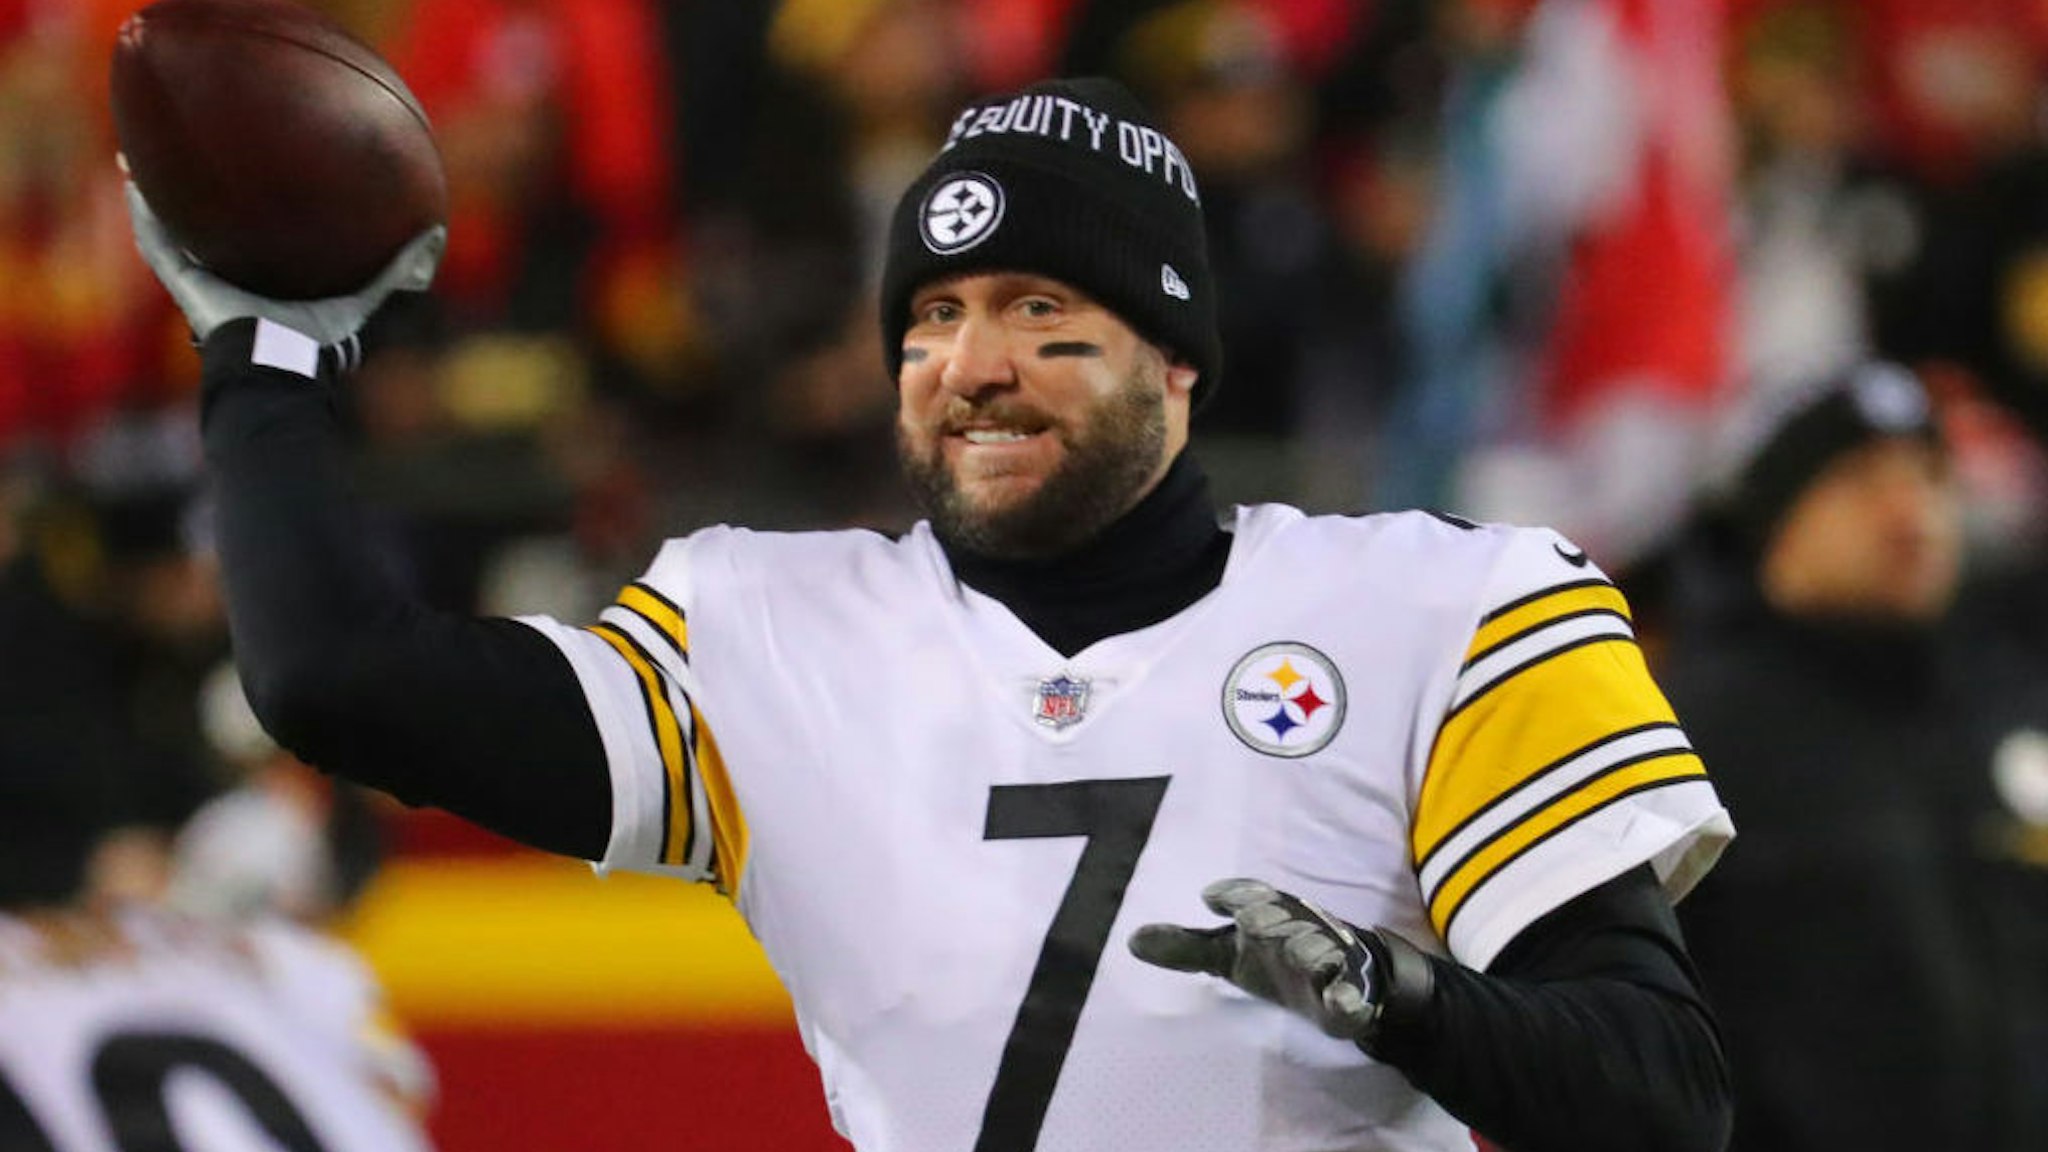 KANSAS CITY, MISSOURI - JANUARY 16: Ben Roethlisberger #7 of the Pittsburgh Steelers warms up before the game against the Kansas City Chiefs in the NFC Wild Card Playoff game at Arrowhead Stadium on January 16, 2022 in Kansas City, Missouri. (Photo by Dilip Vishwanat/Getty Images)